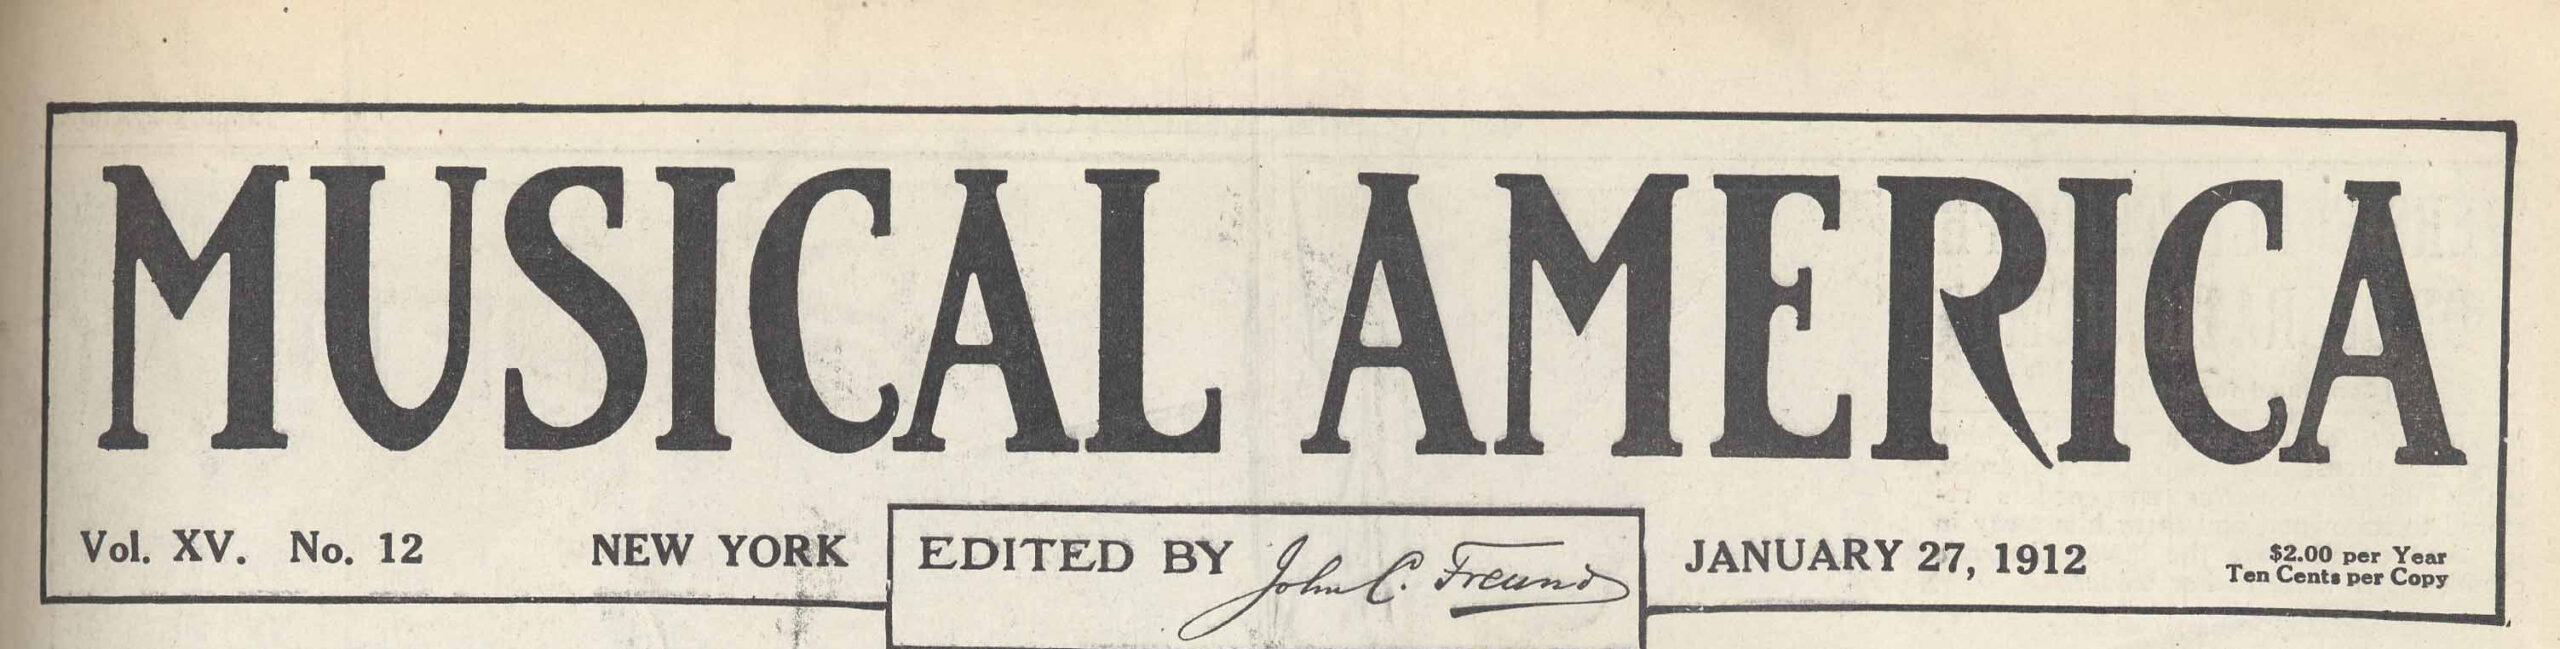 The 1912 masthead for Musical America